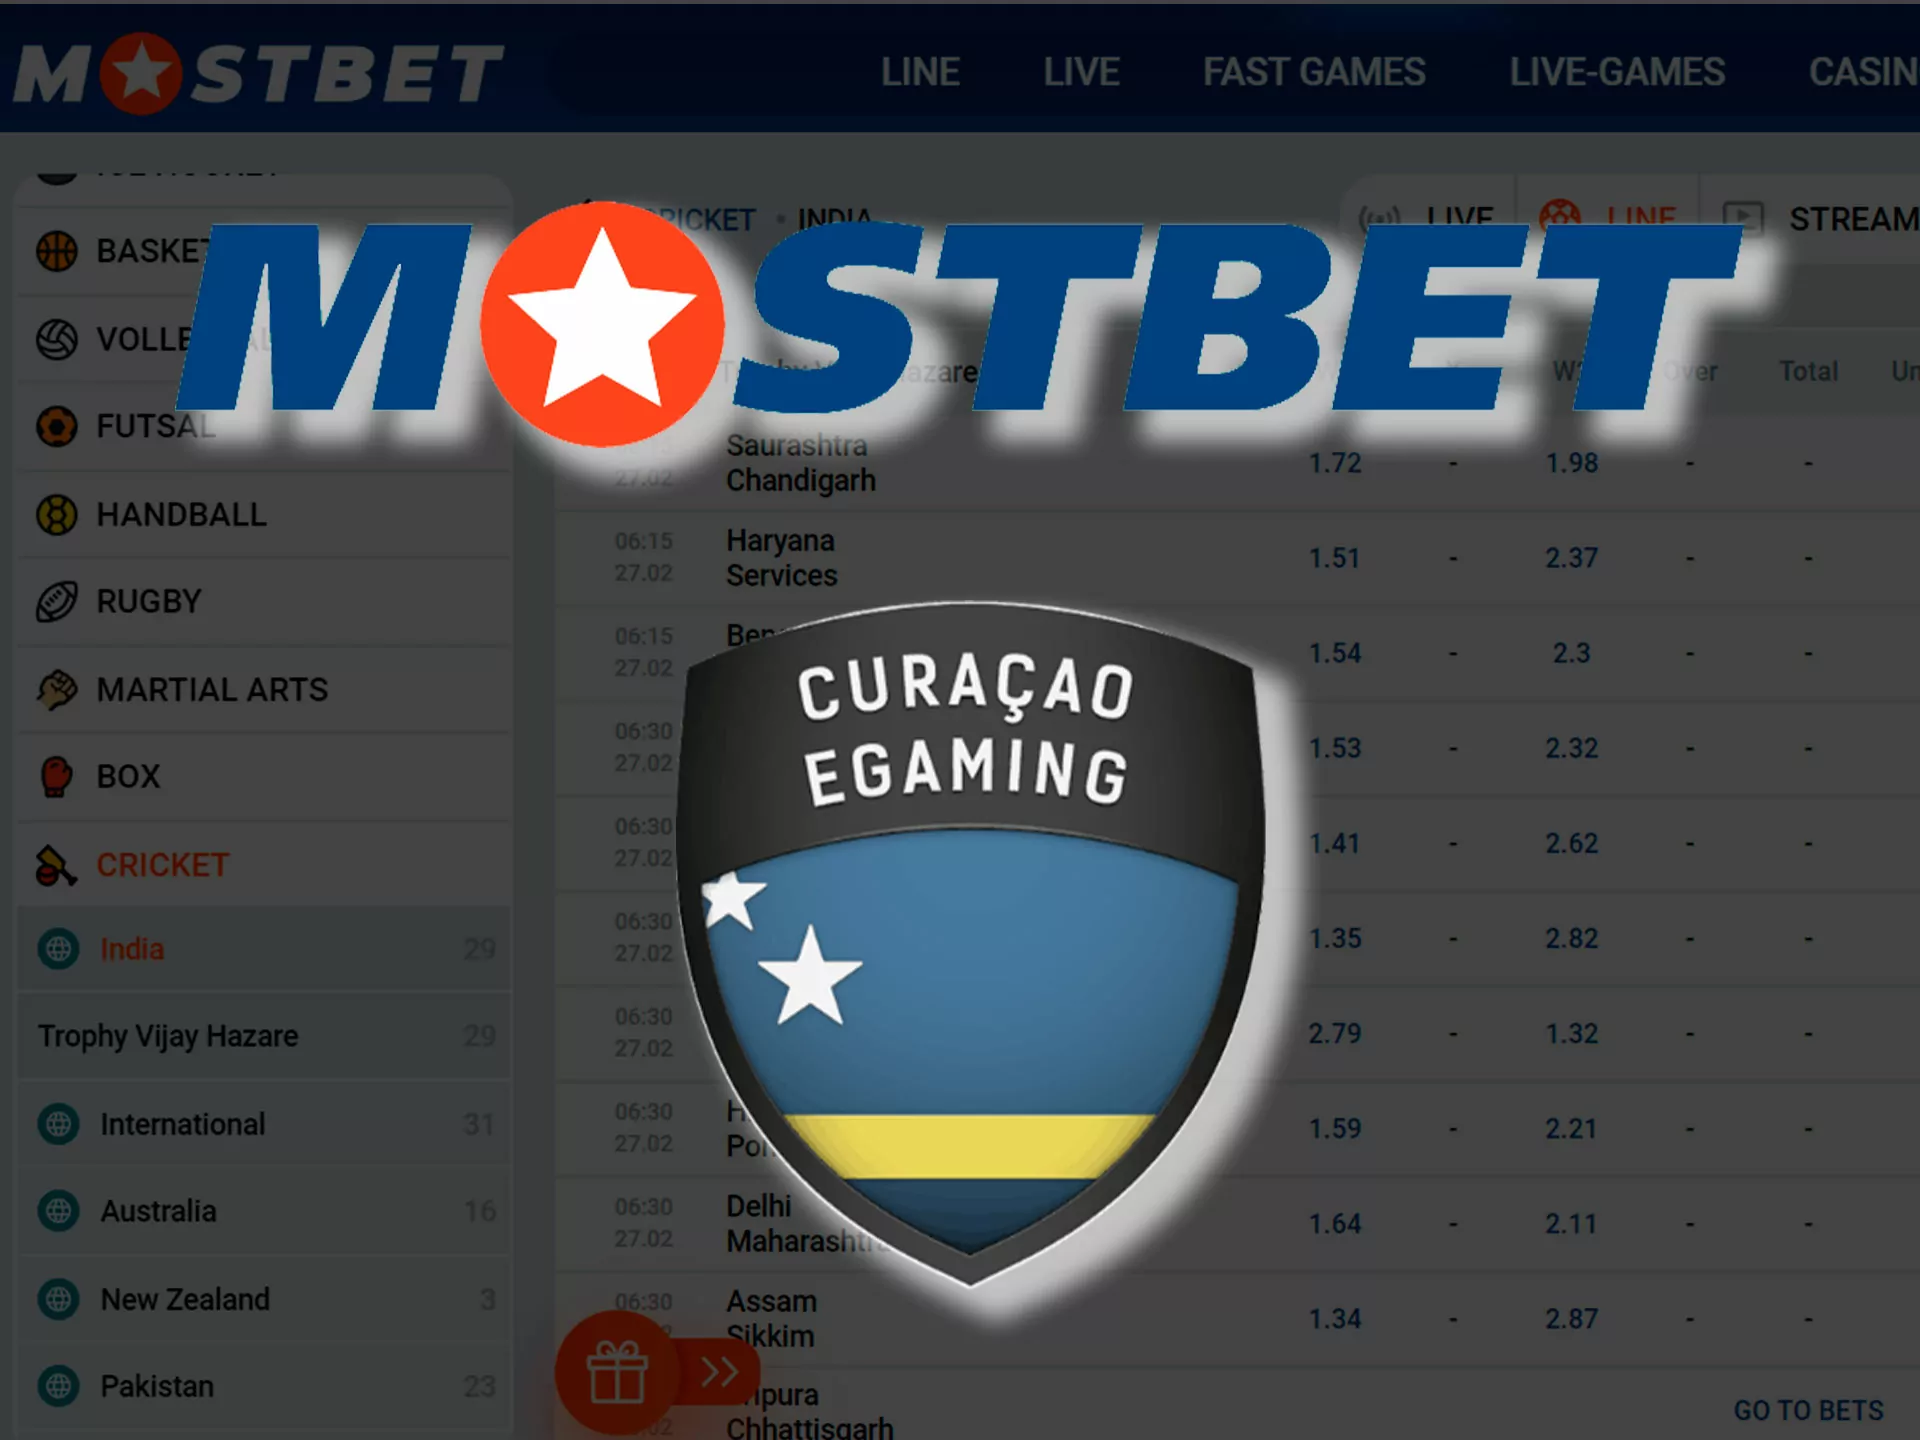 Mostbet was verified by the Curacao and is working under the license.